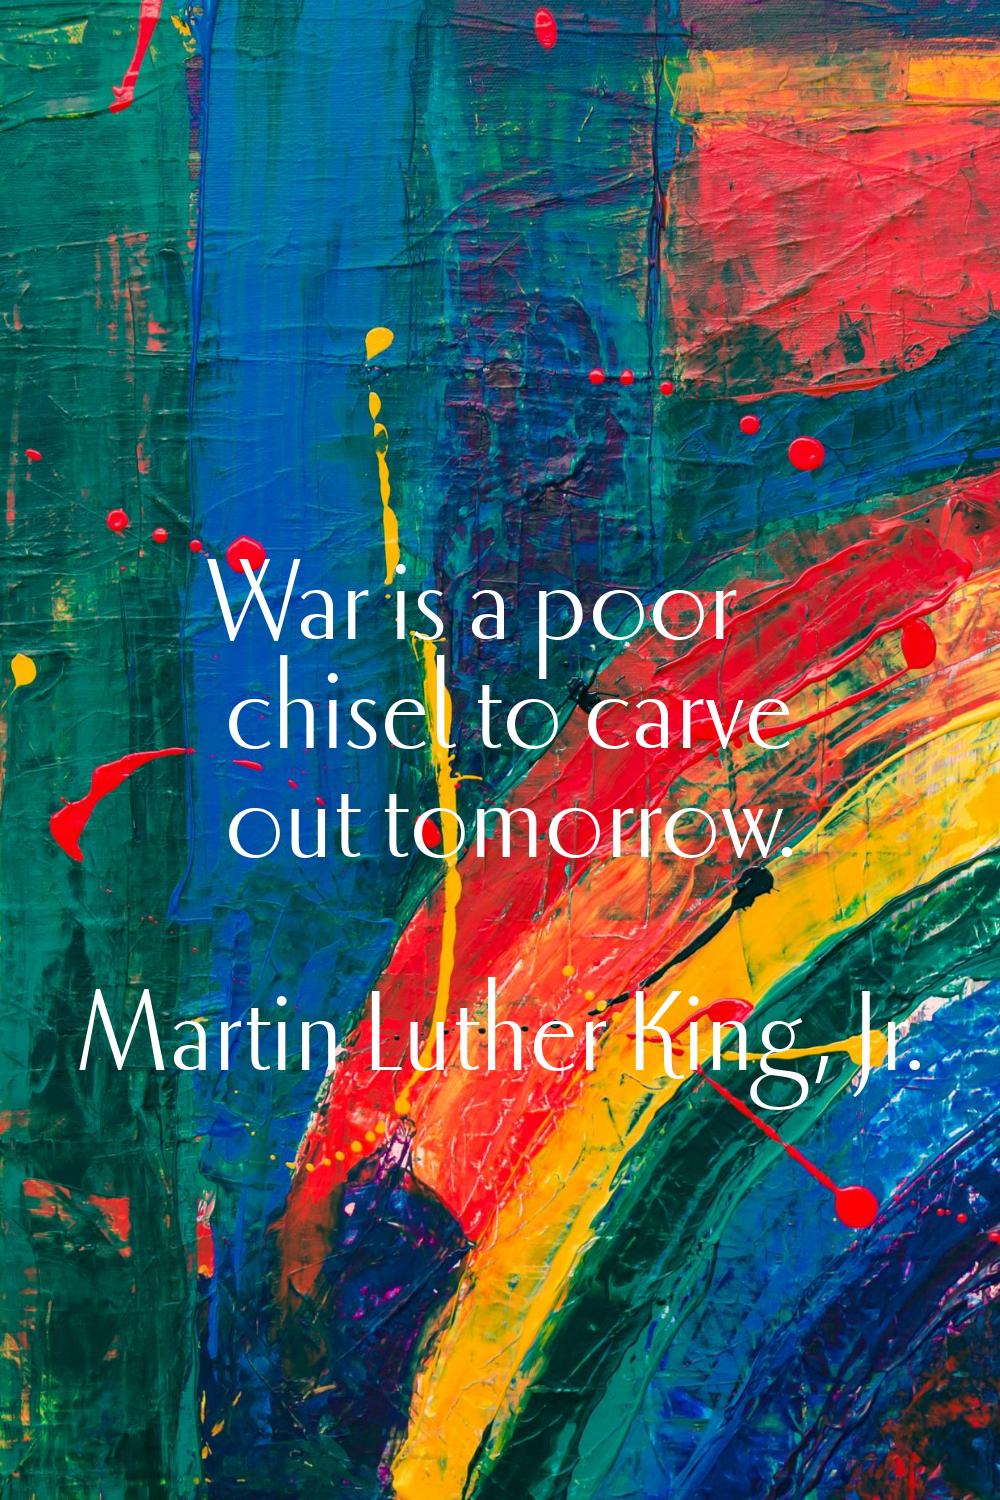 War is a poor chisel to carve out tomorrow.